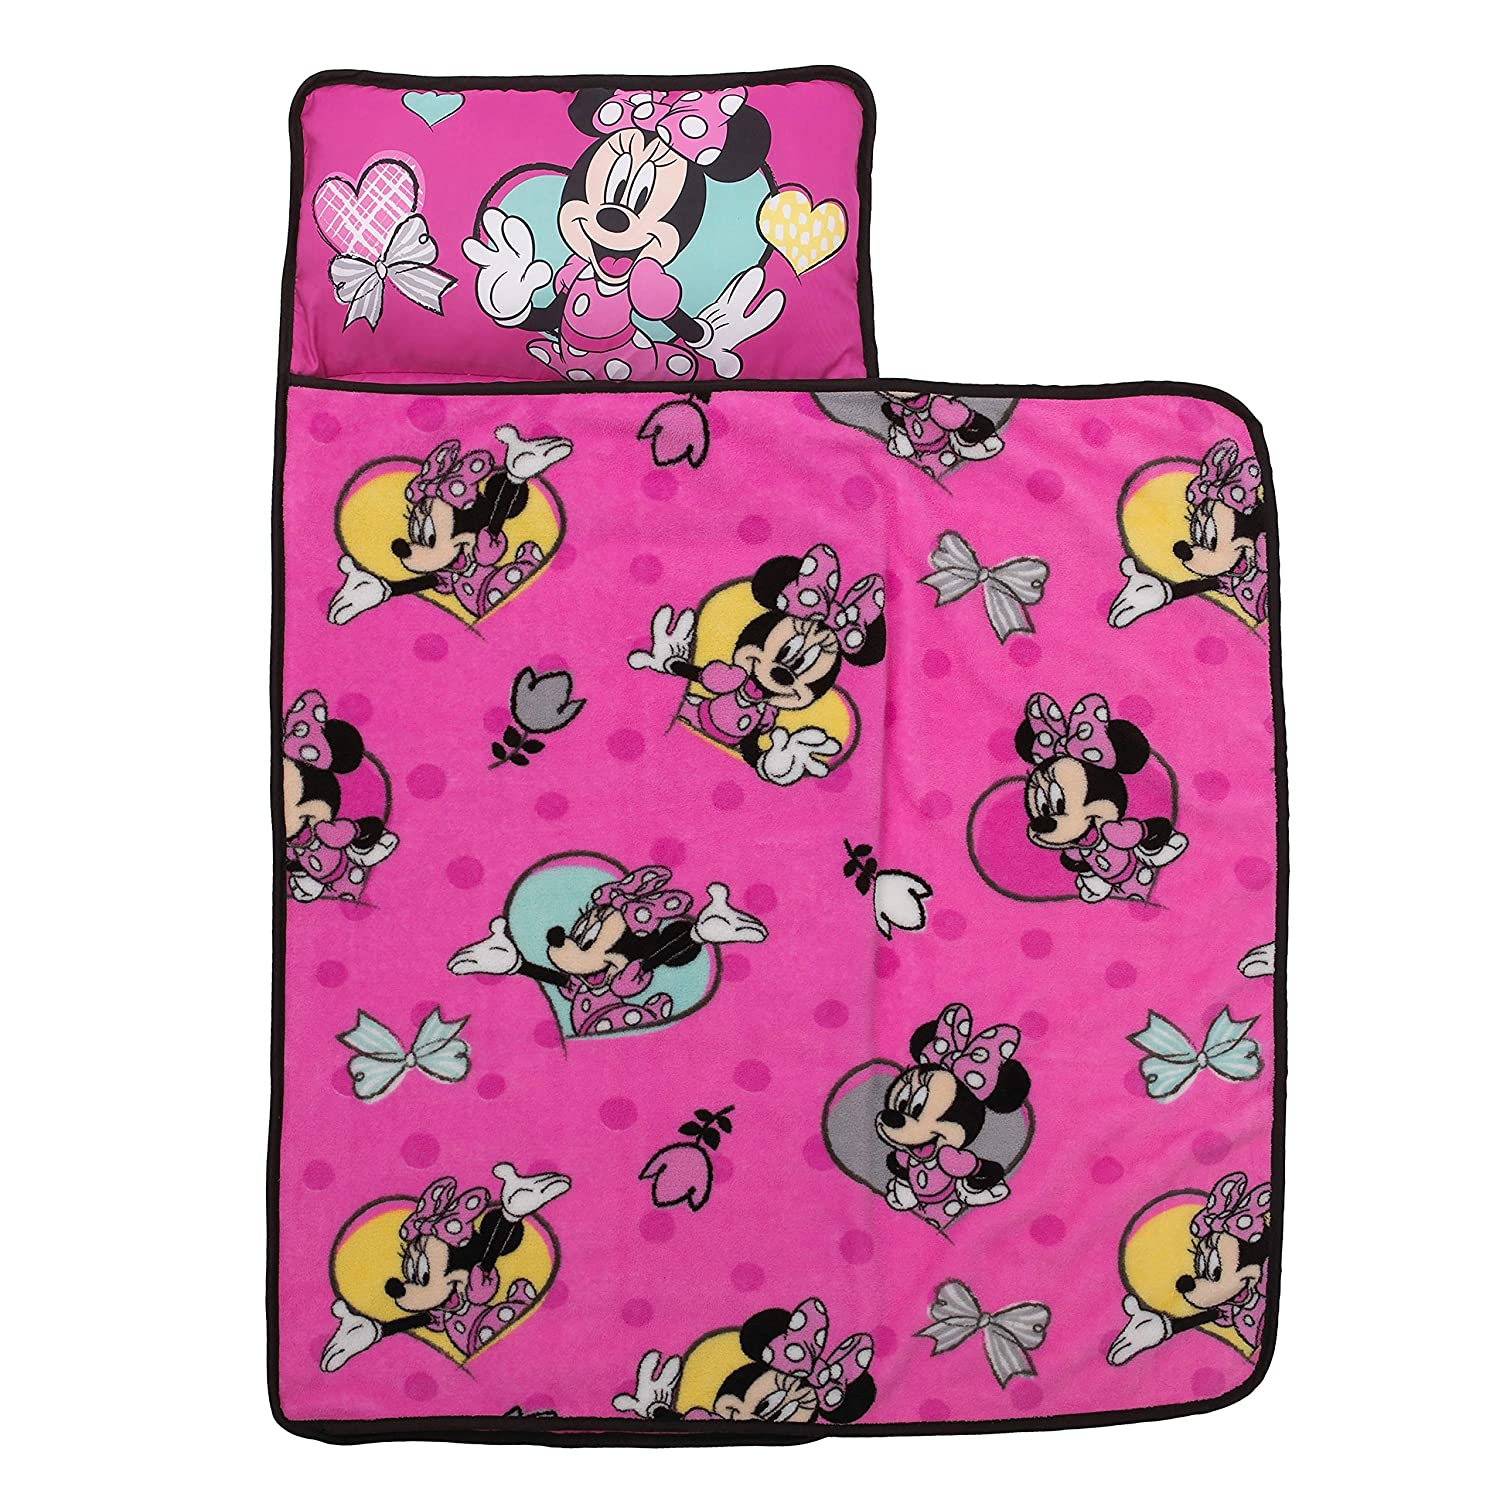 Disney Minnie Mouse Toddler Nap Mat, Pink, Aqua, Yellow - with Attached Pillow and Blanket